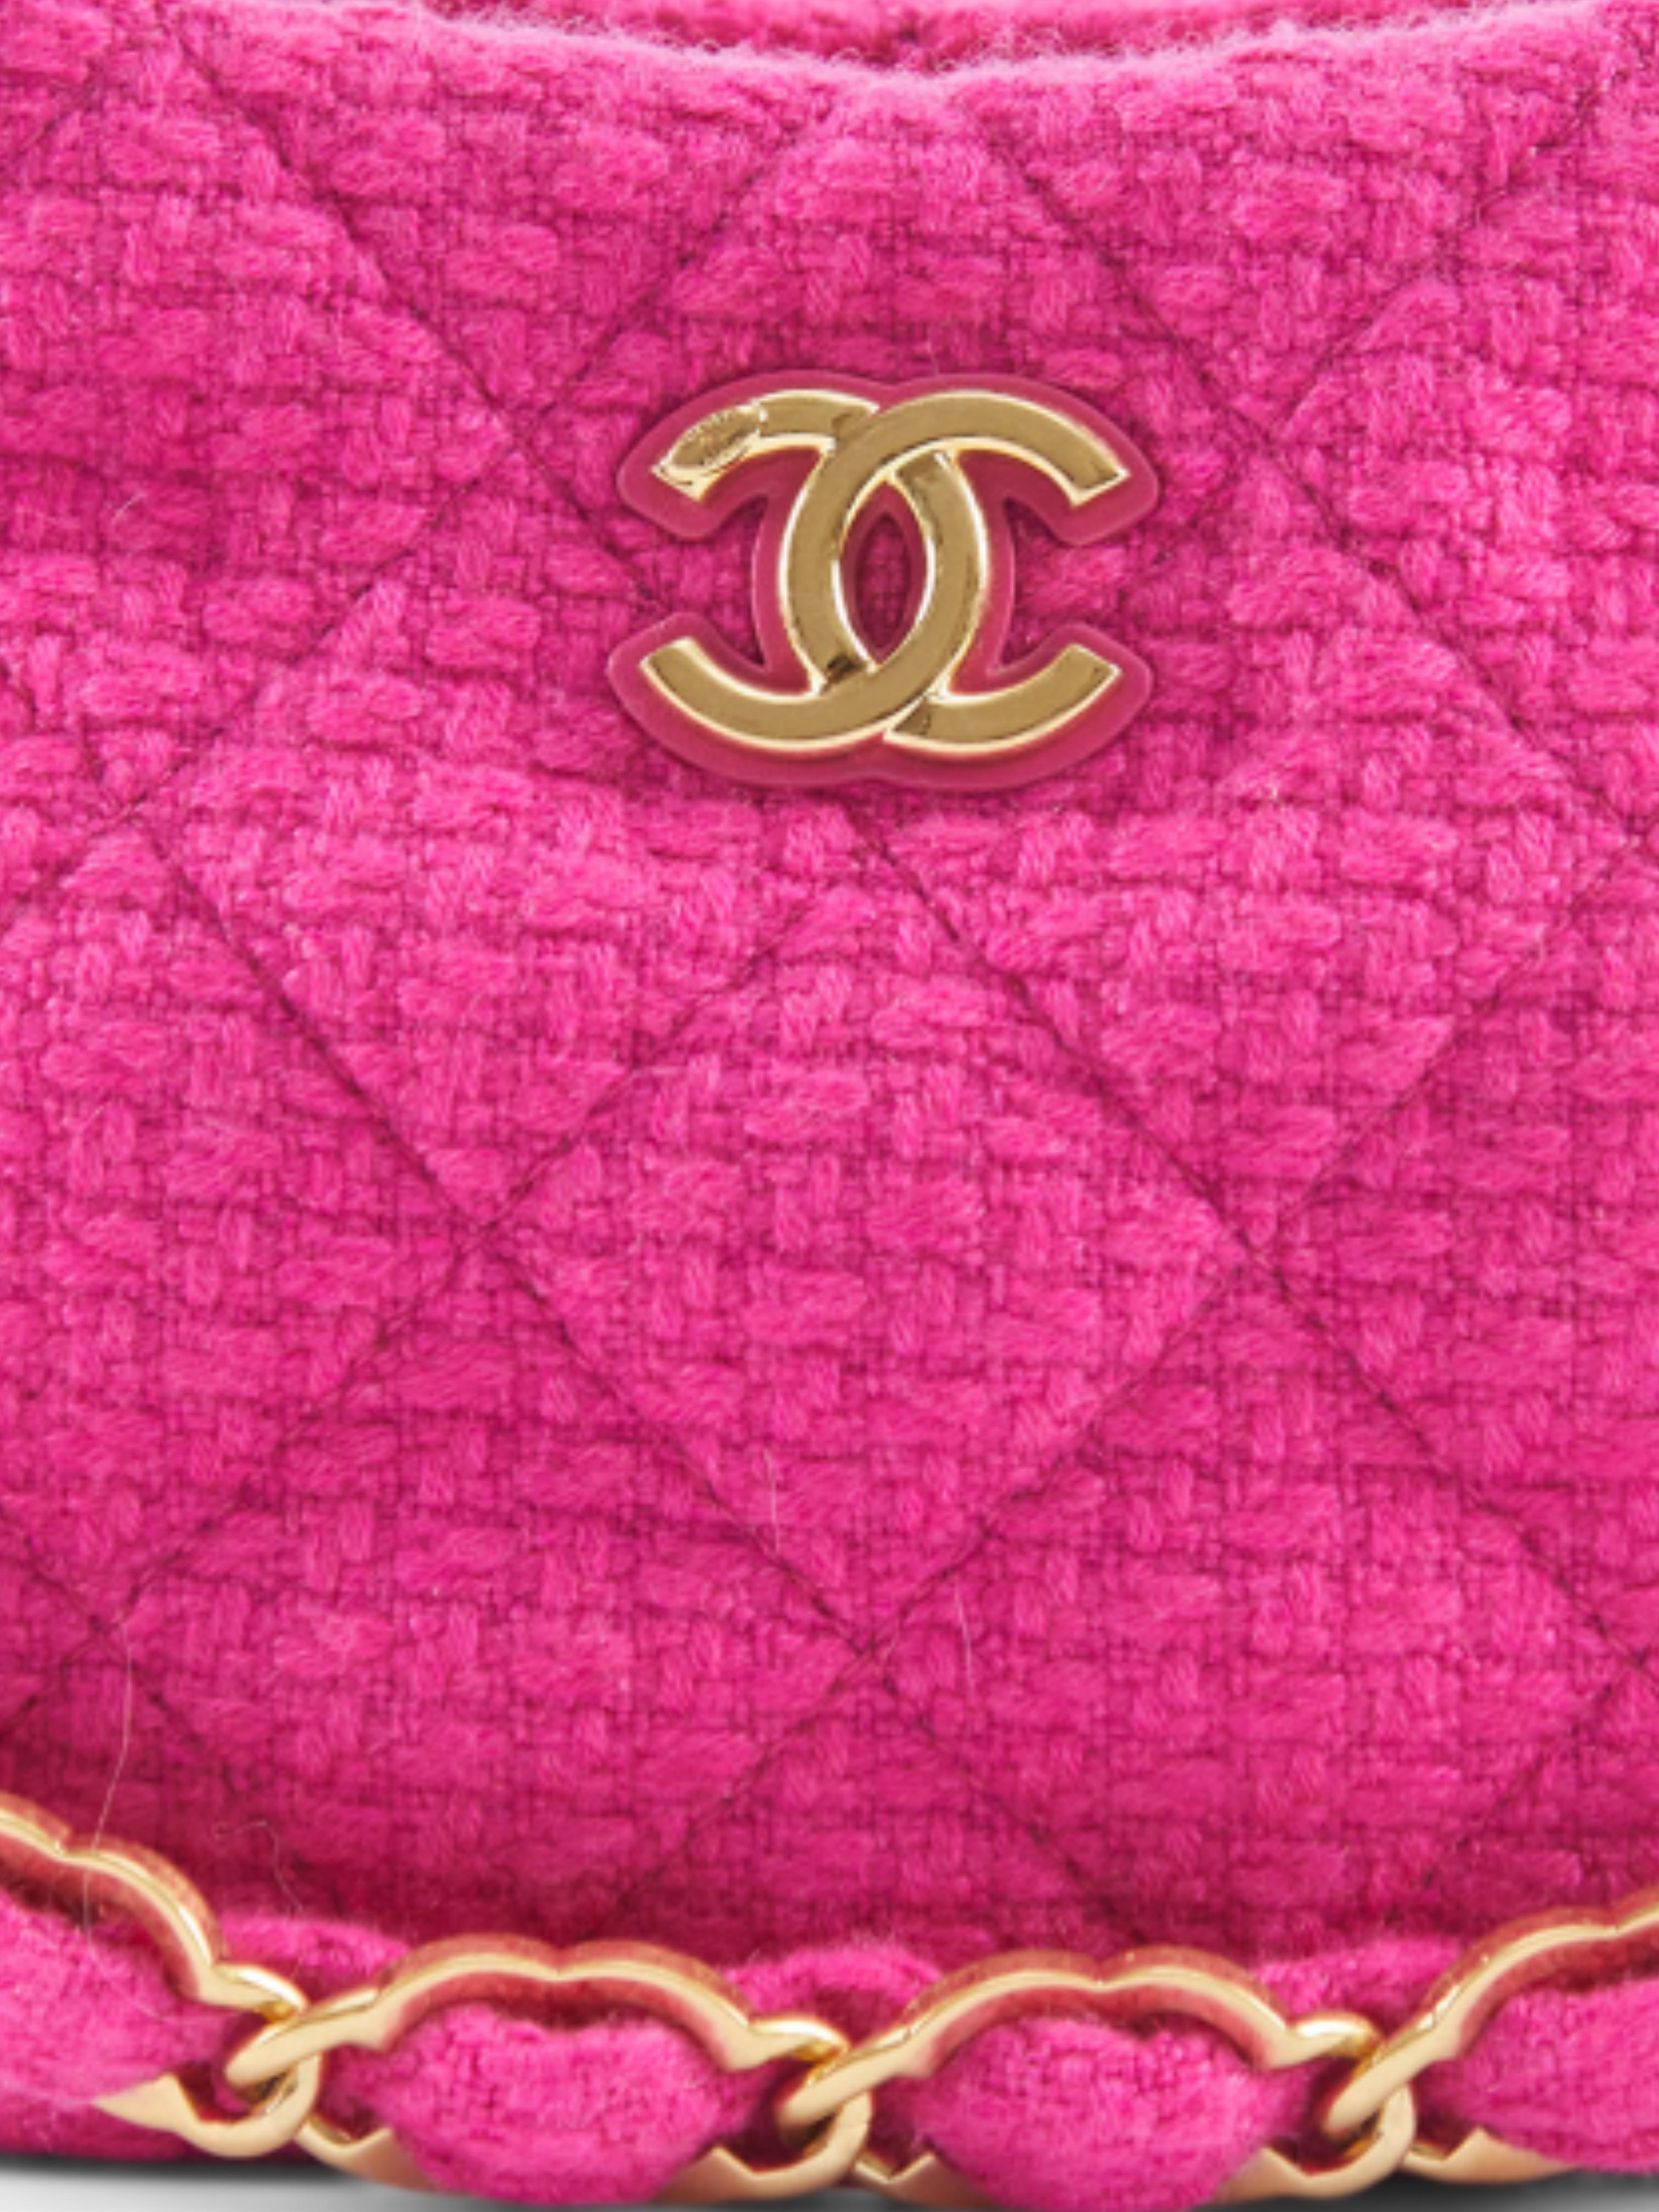 CHANEL GABRIELLE HOBO BAG PINK Tweed with Gold-Tone Hardware In Excellent Condition For Sale In London, GB